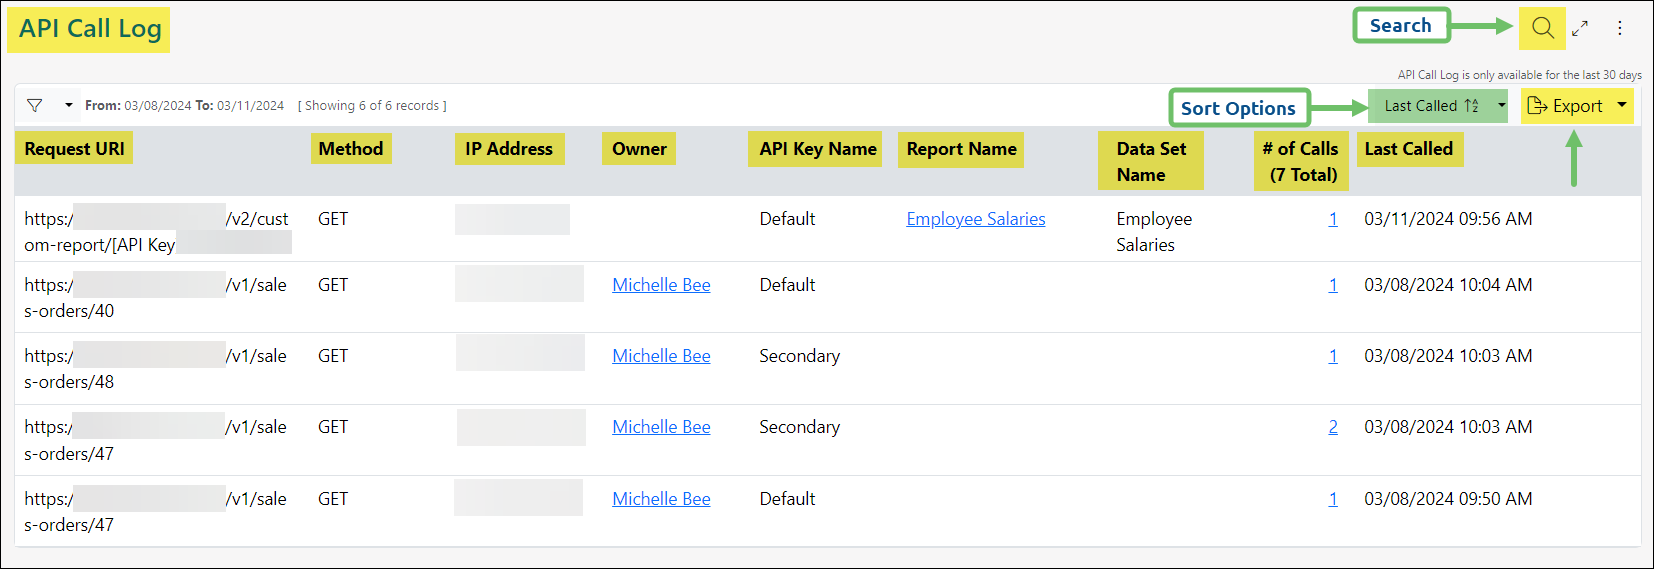 View of the API Call Log list showing available columns, search, and sort options